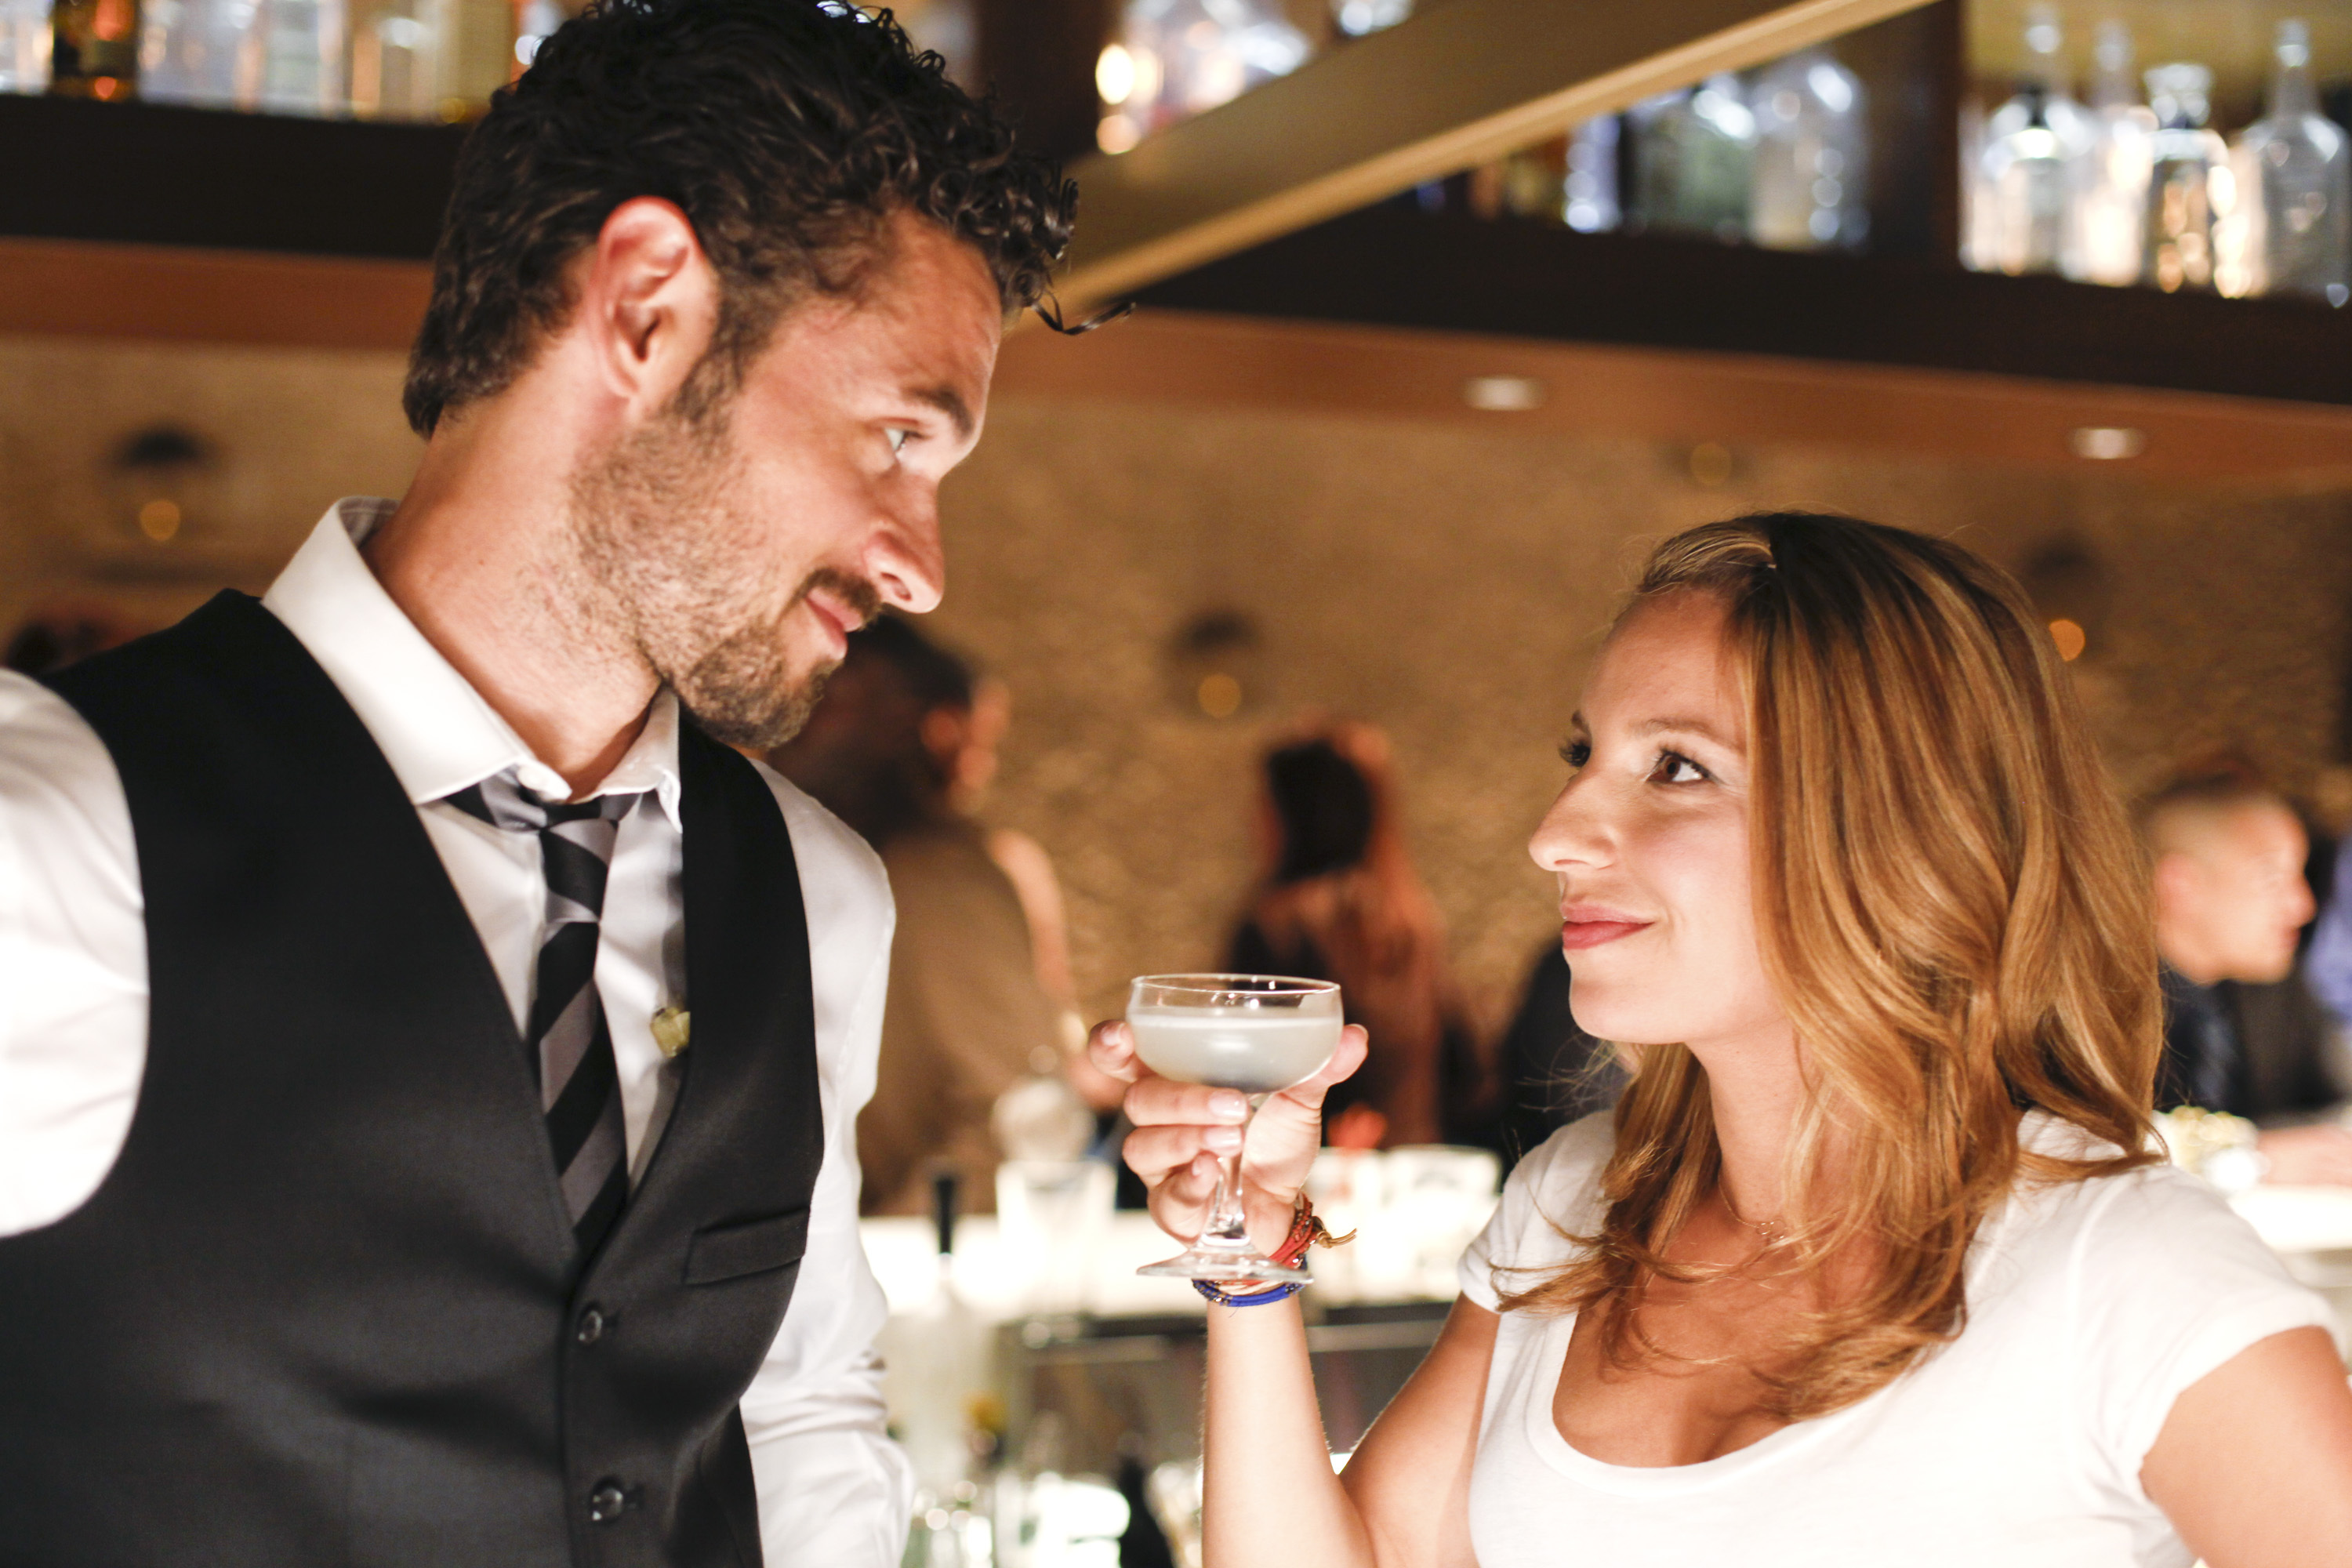 Sexy bartender Dominic (Adan Canto) and cocktail waitress Kacey (Vanessa Lengies) share a moment. (Mixology).